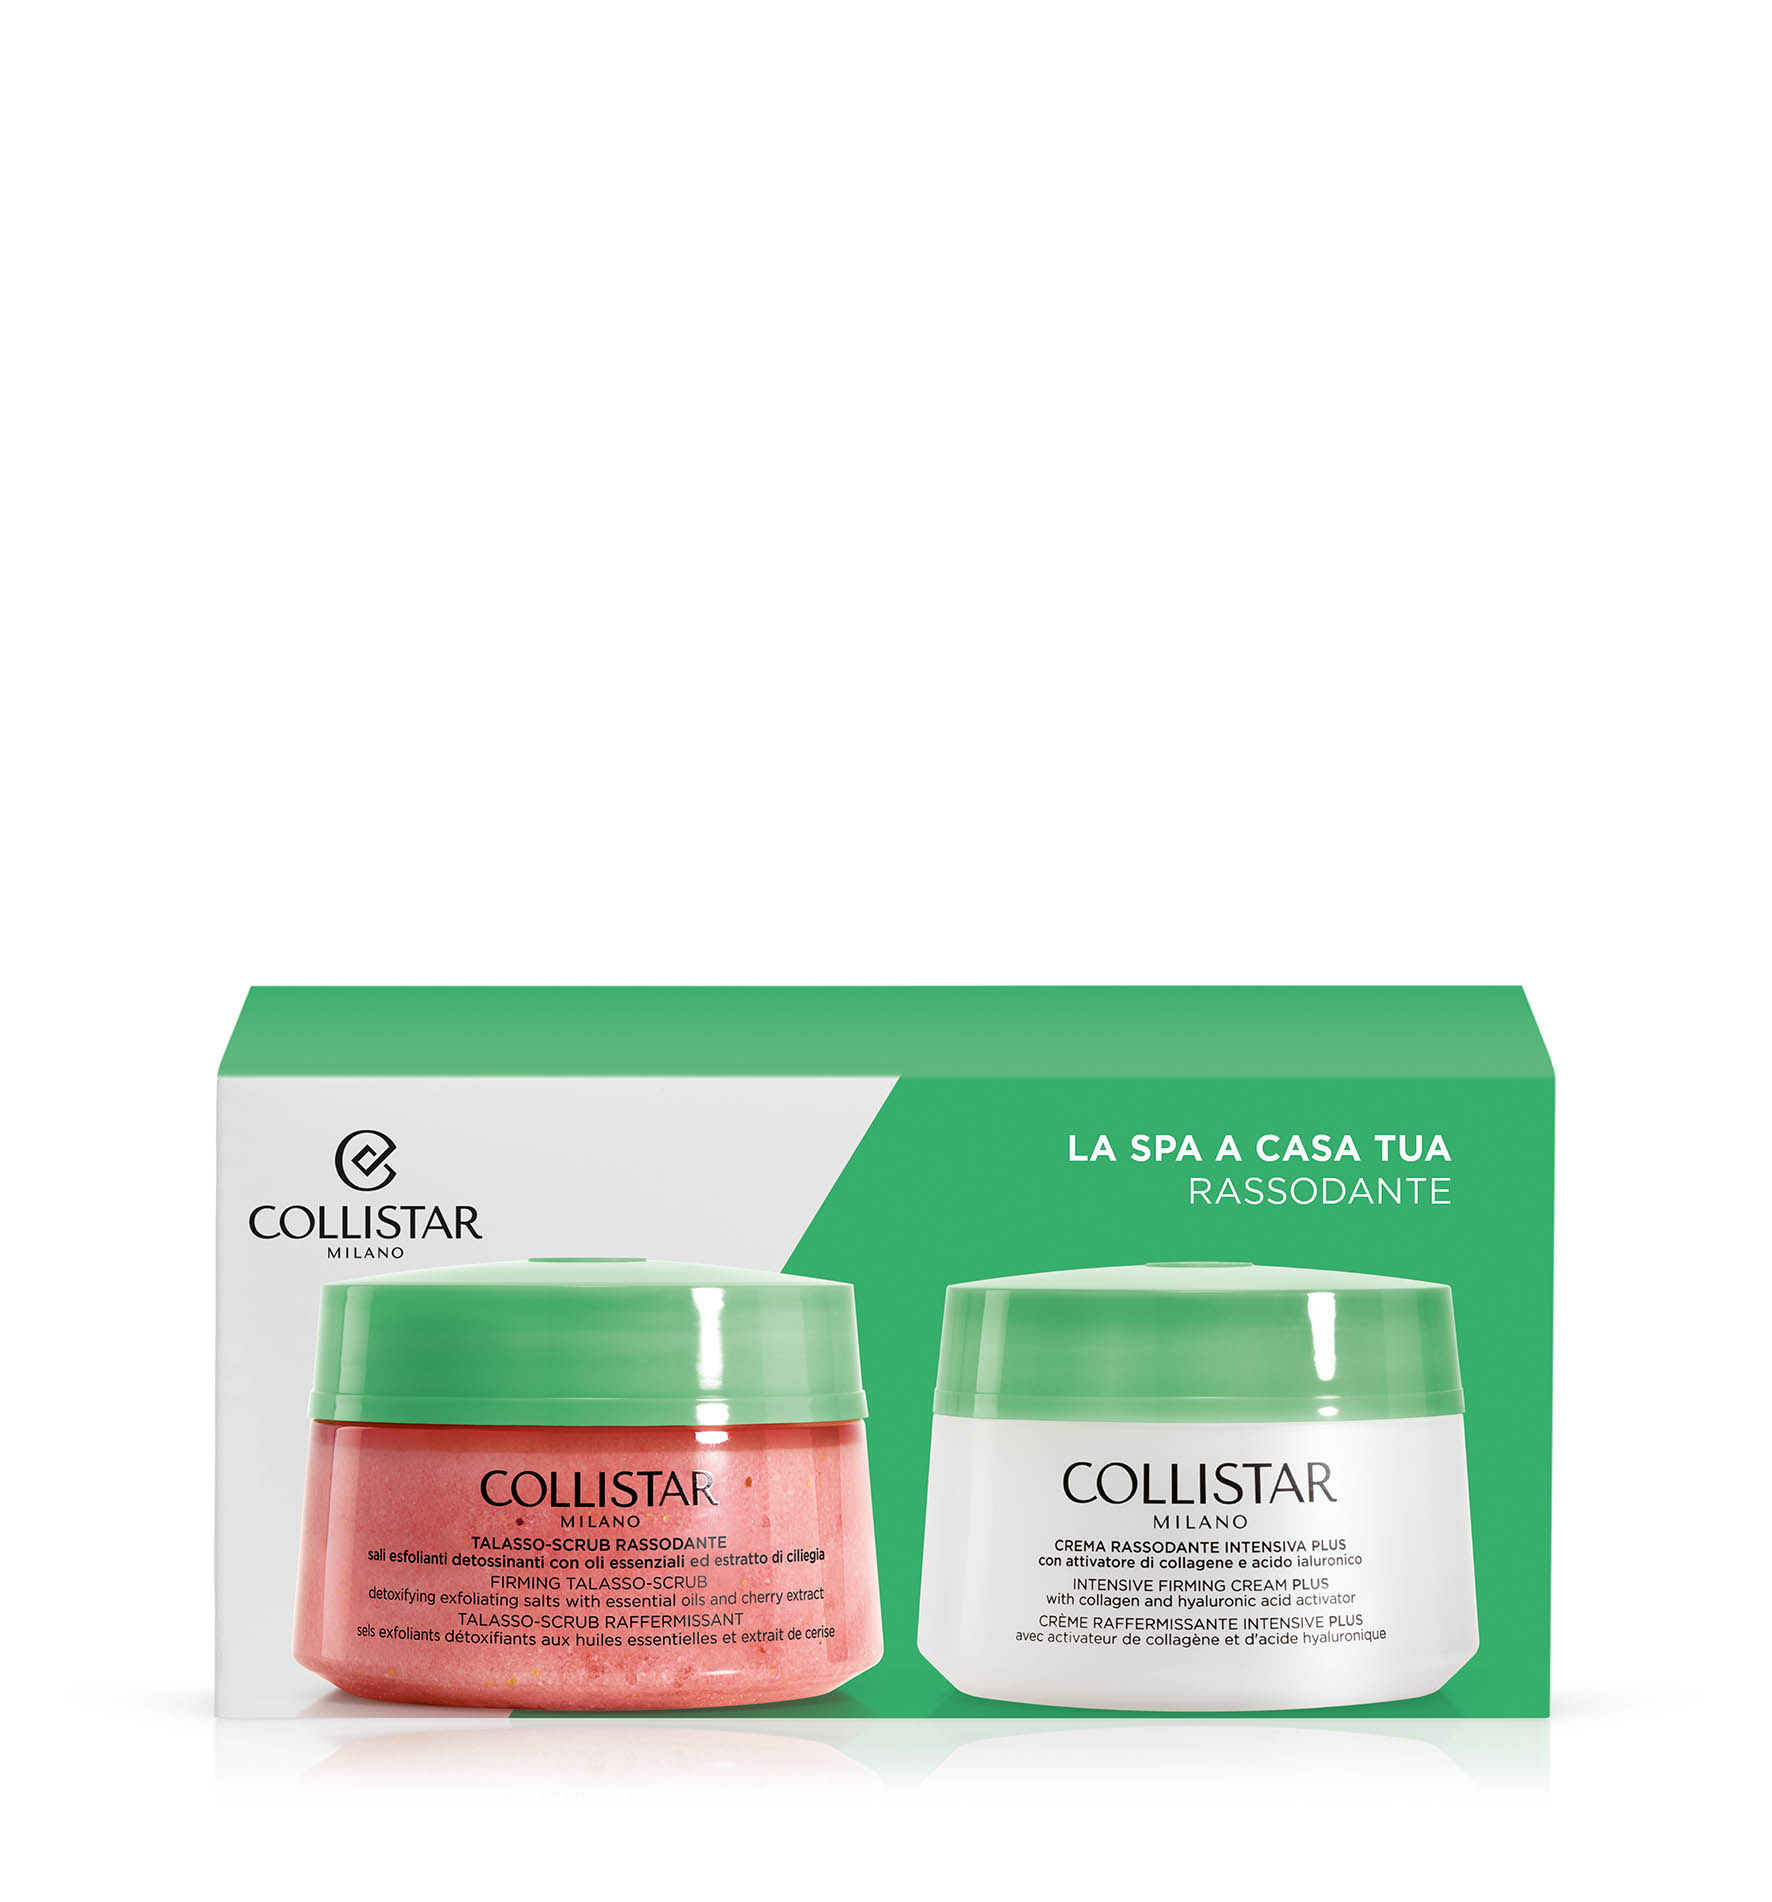 SET SPA AT HOME
- FIRMING BODY ROUTINE - BODY | Collistar - Shop Online Ufficiale